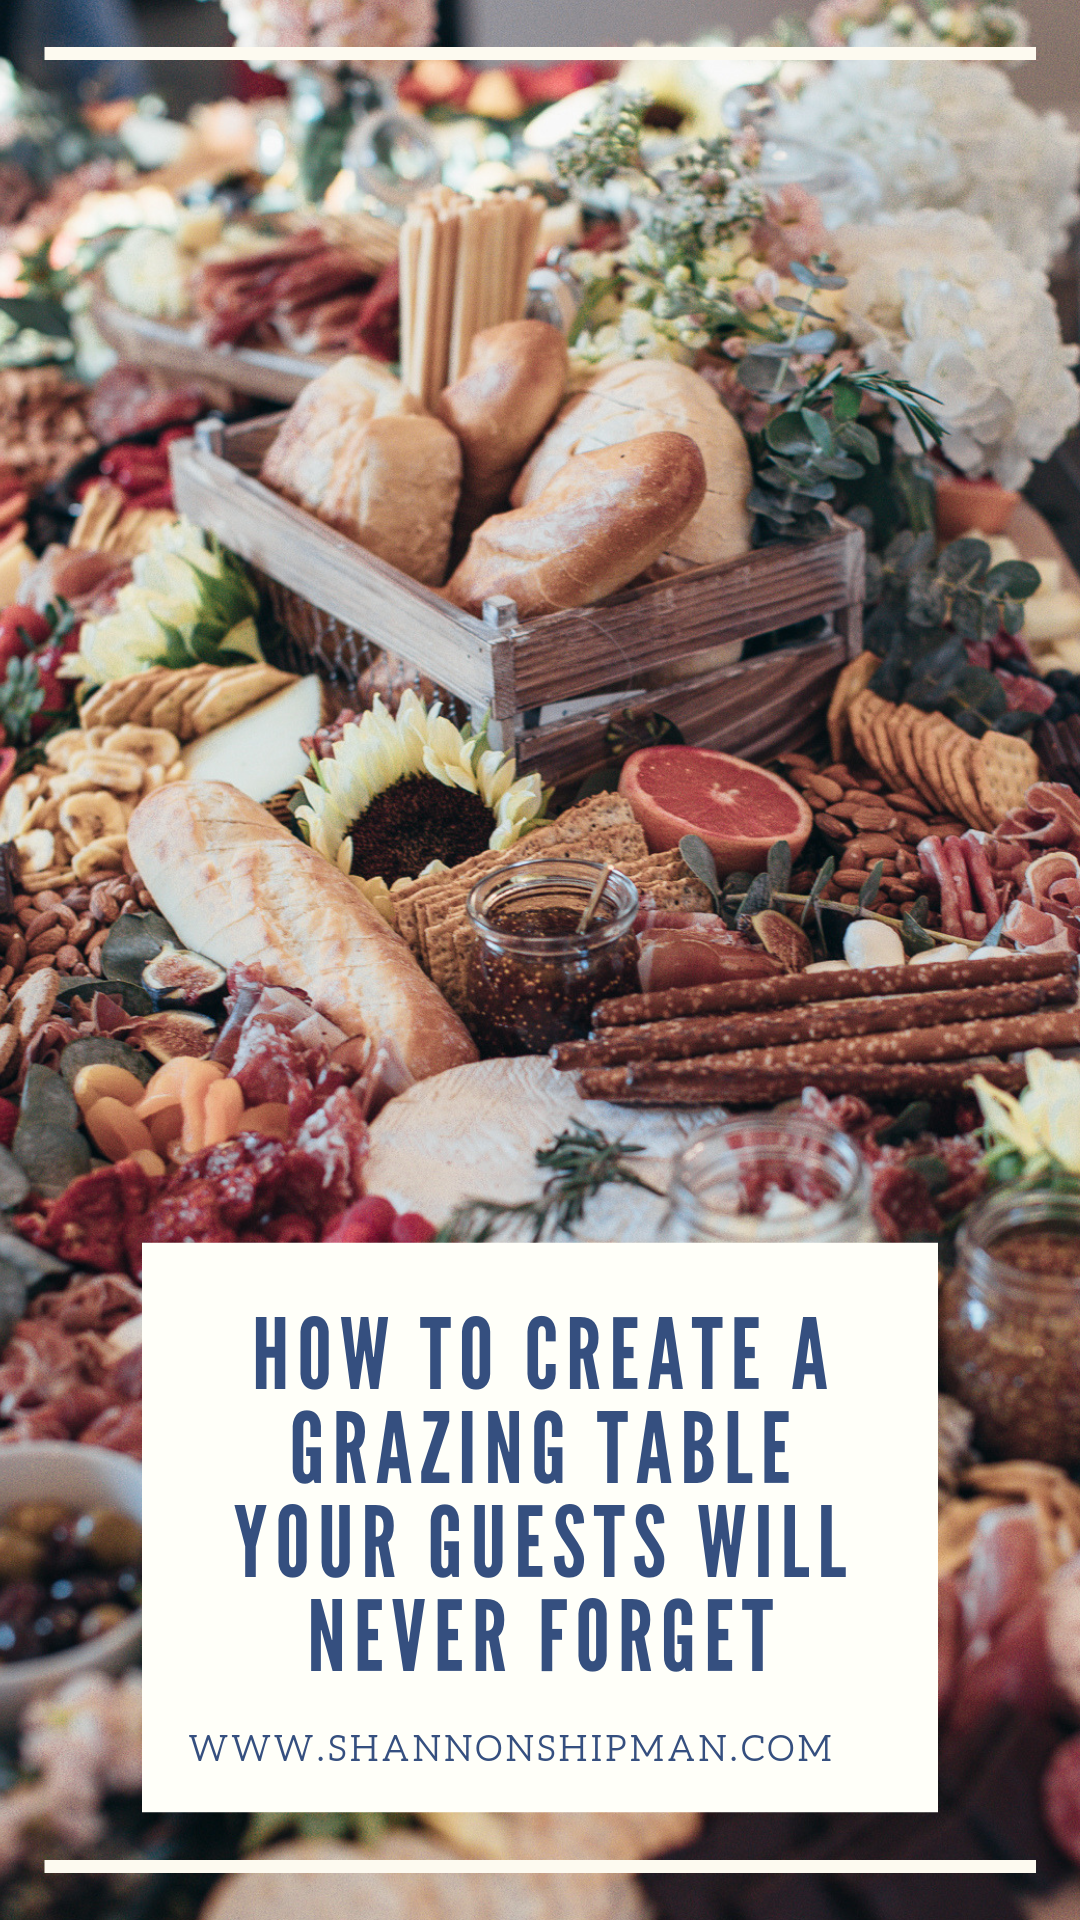 How to Create a Grazing Table Your Guests Will Never Forget